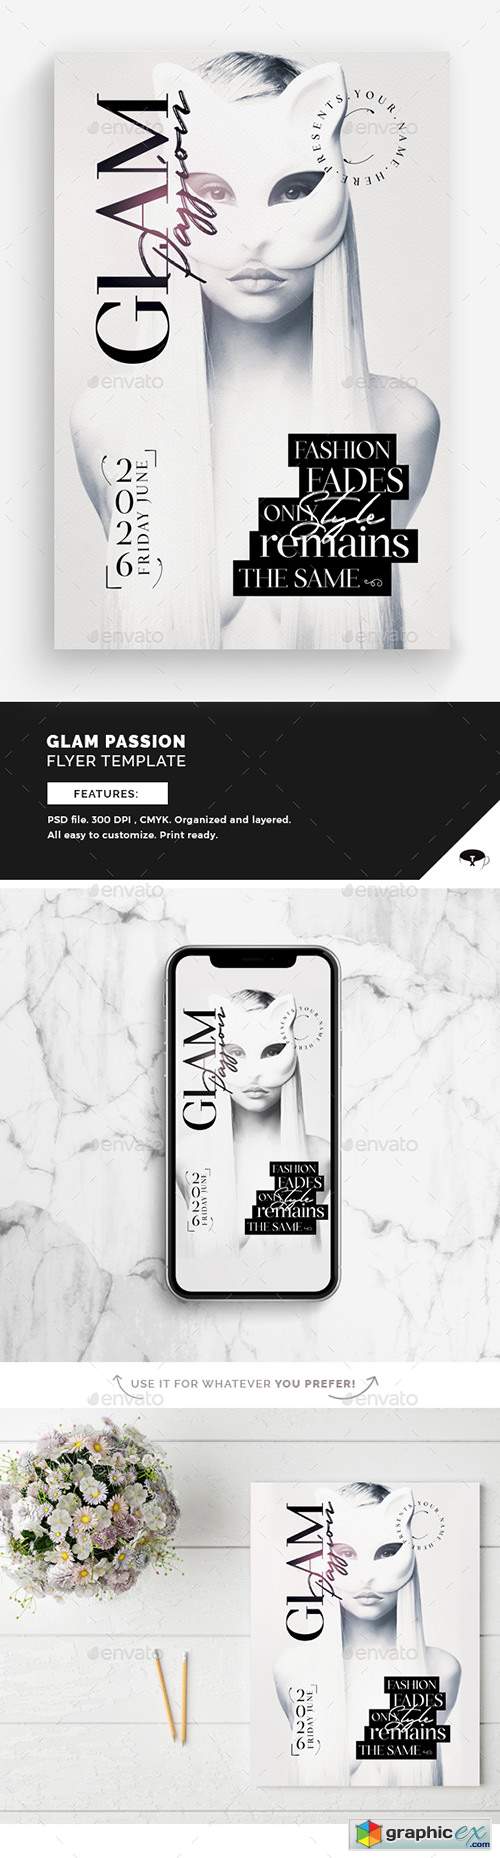 Glam Passion Flyer Template